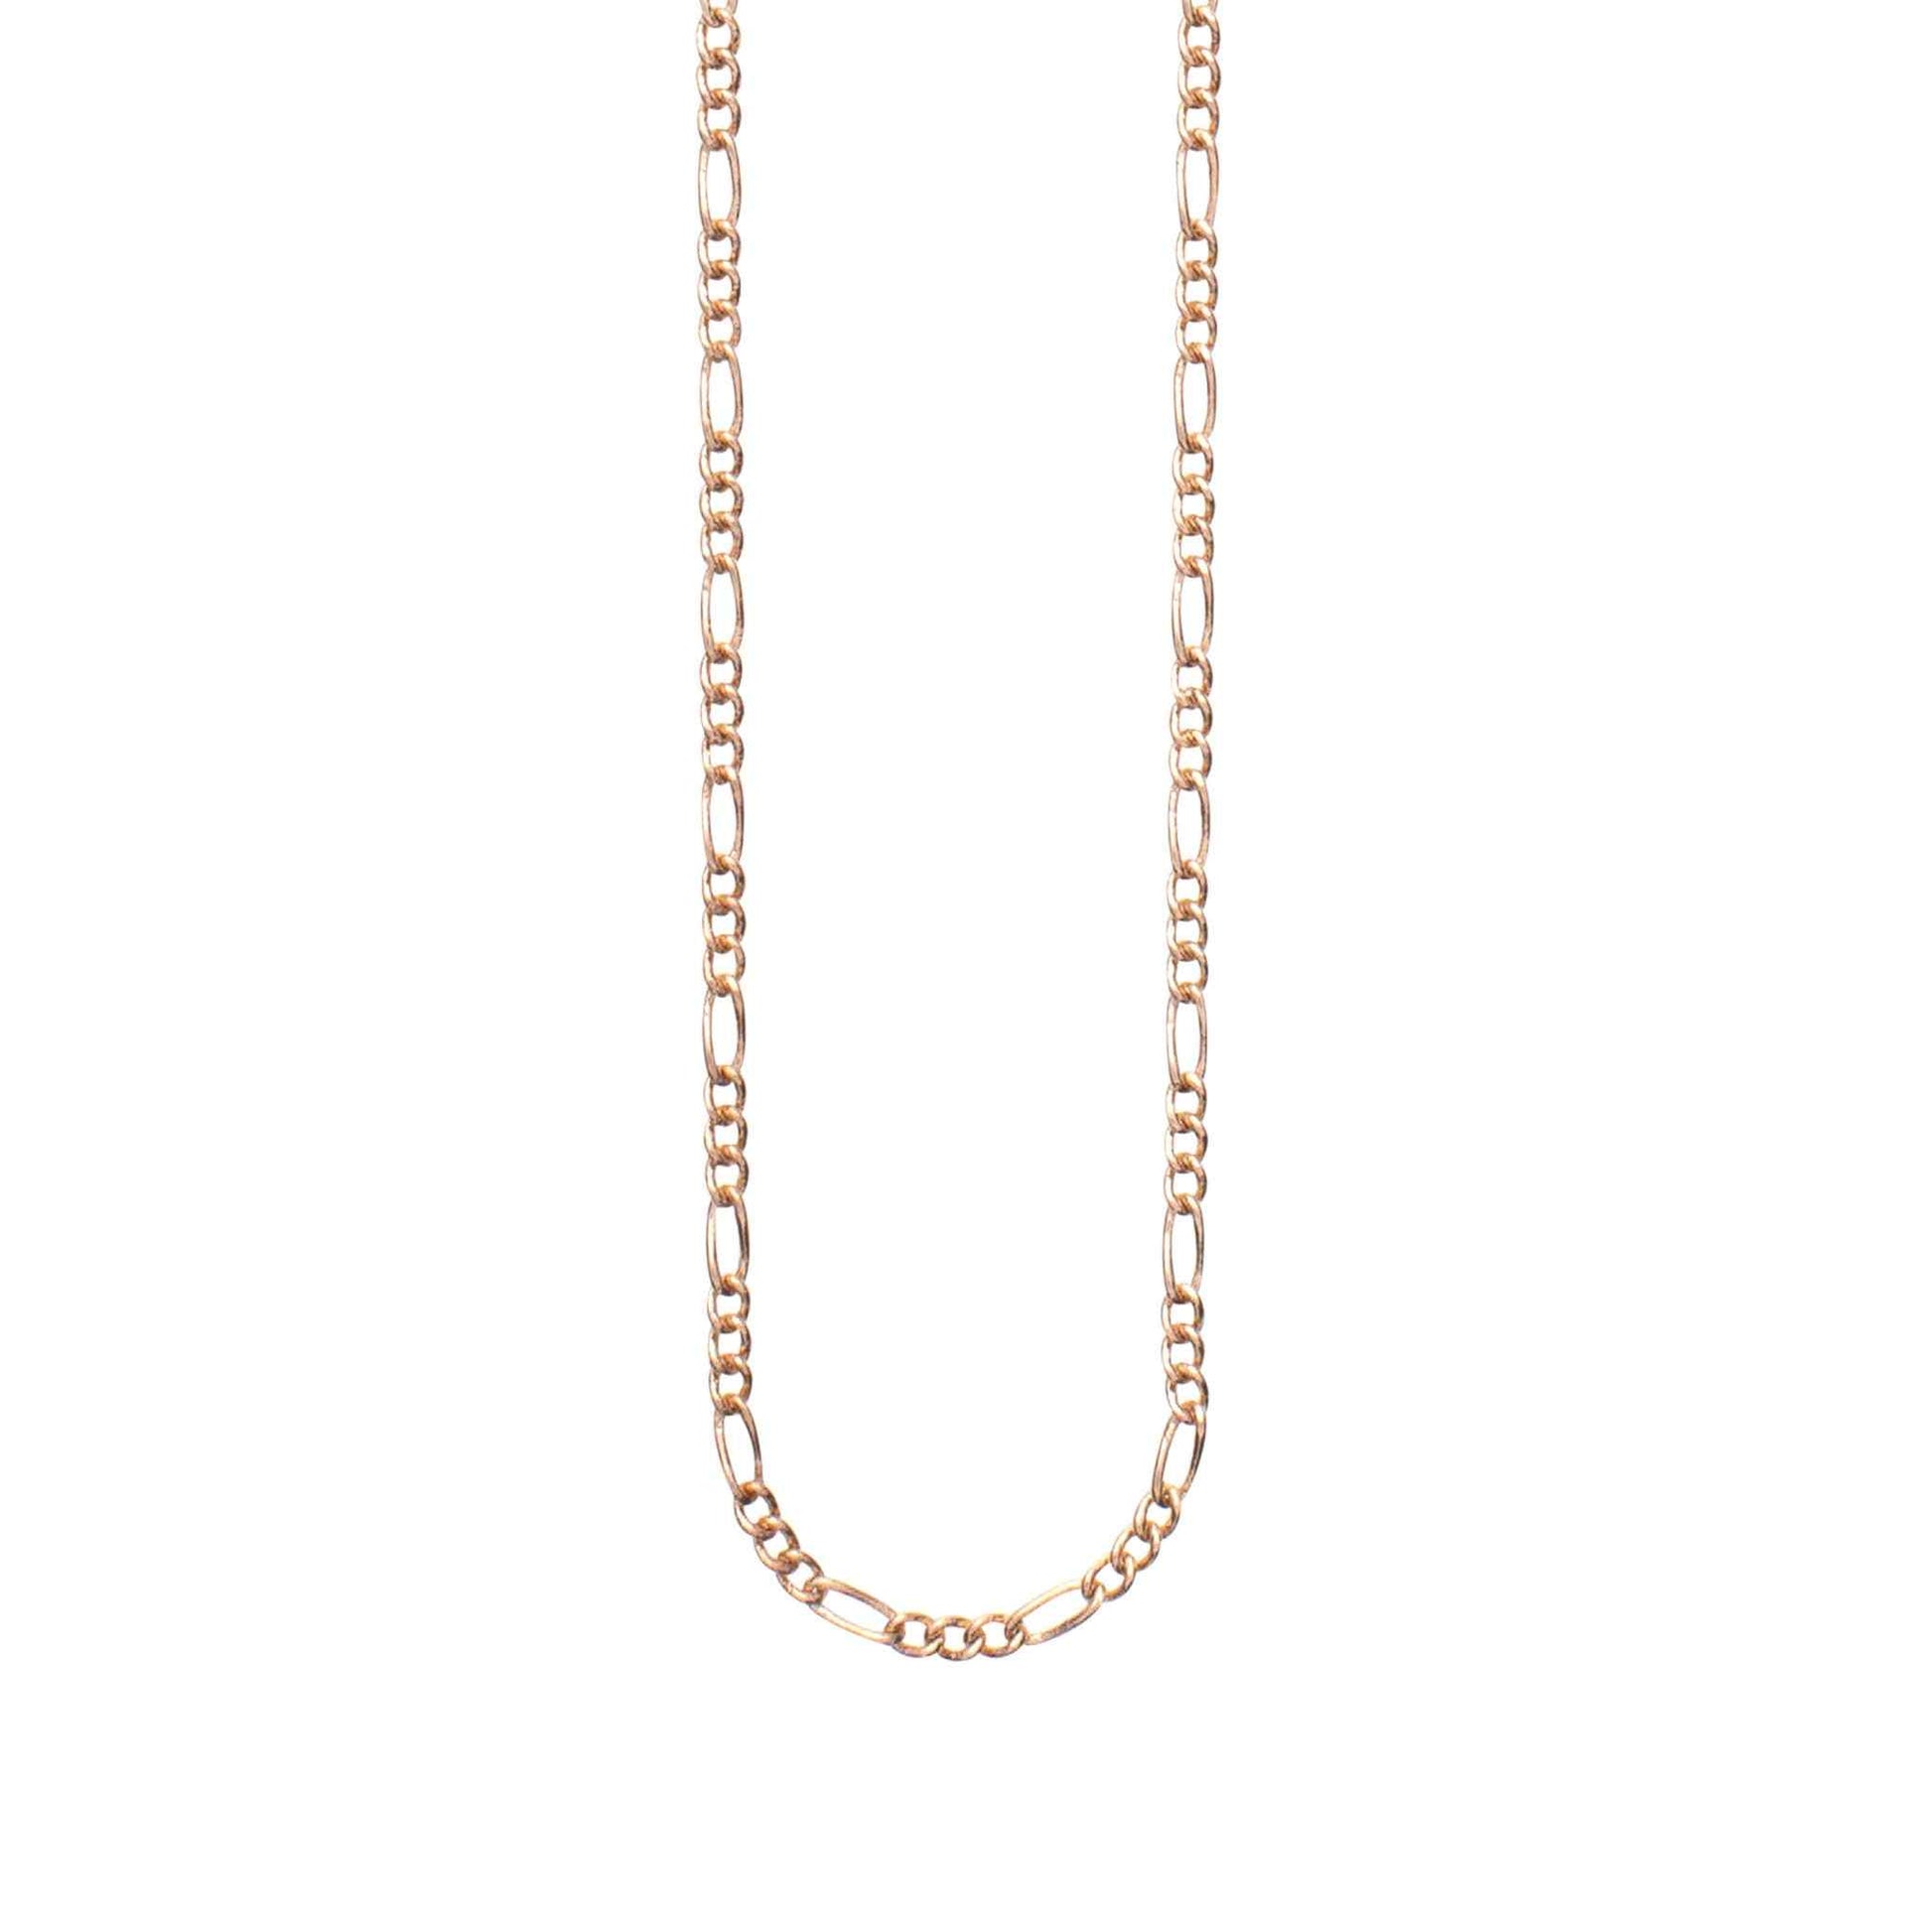 A 16" 1mm figaro chain displayed on a neutral white background.